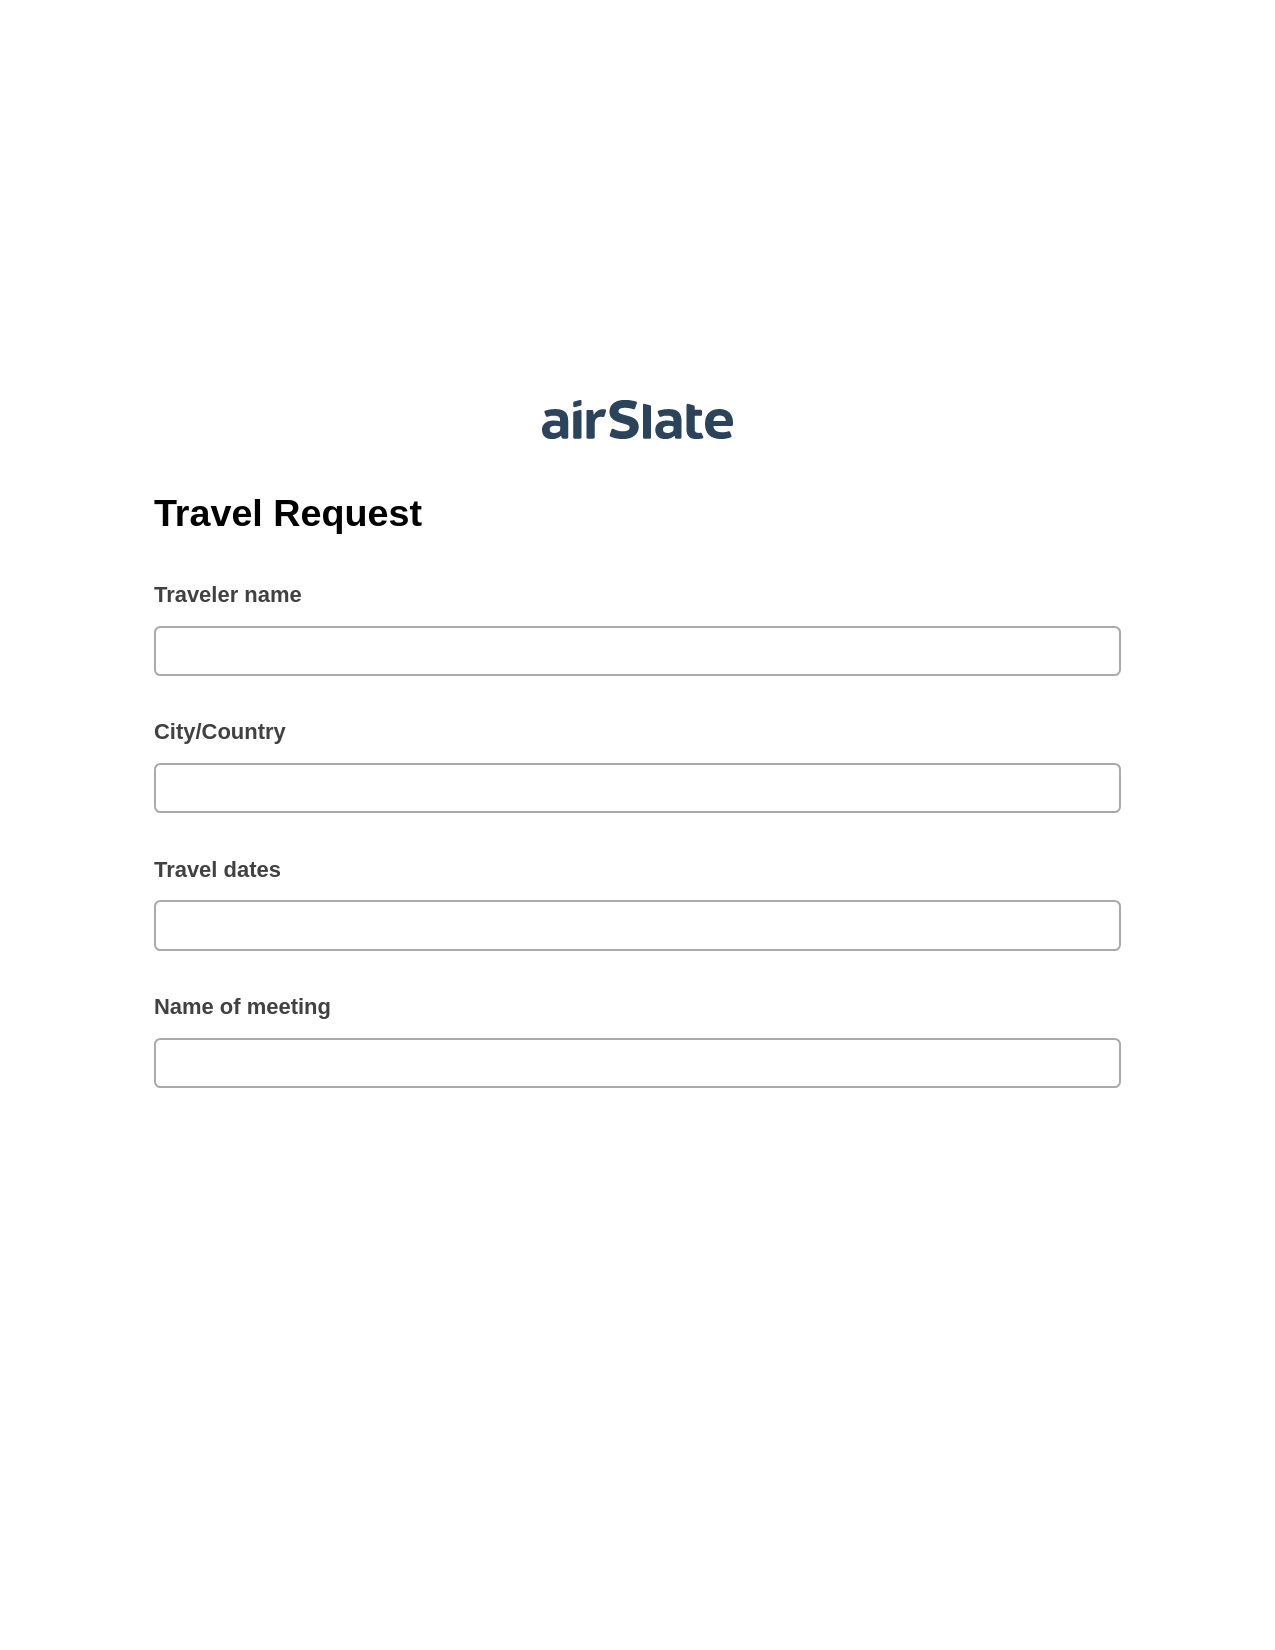 Travel Request Pre-fill from Salesforce Record Bot, Revoke Access Bot, Archive to SharePoint Folder Bot